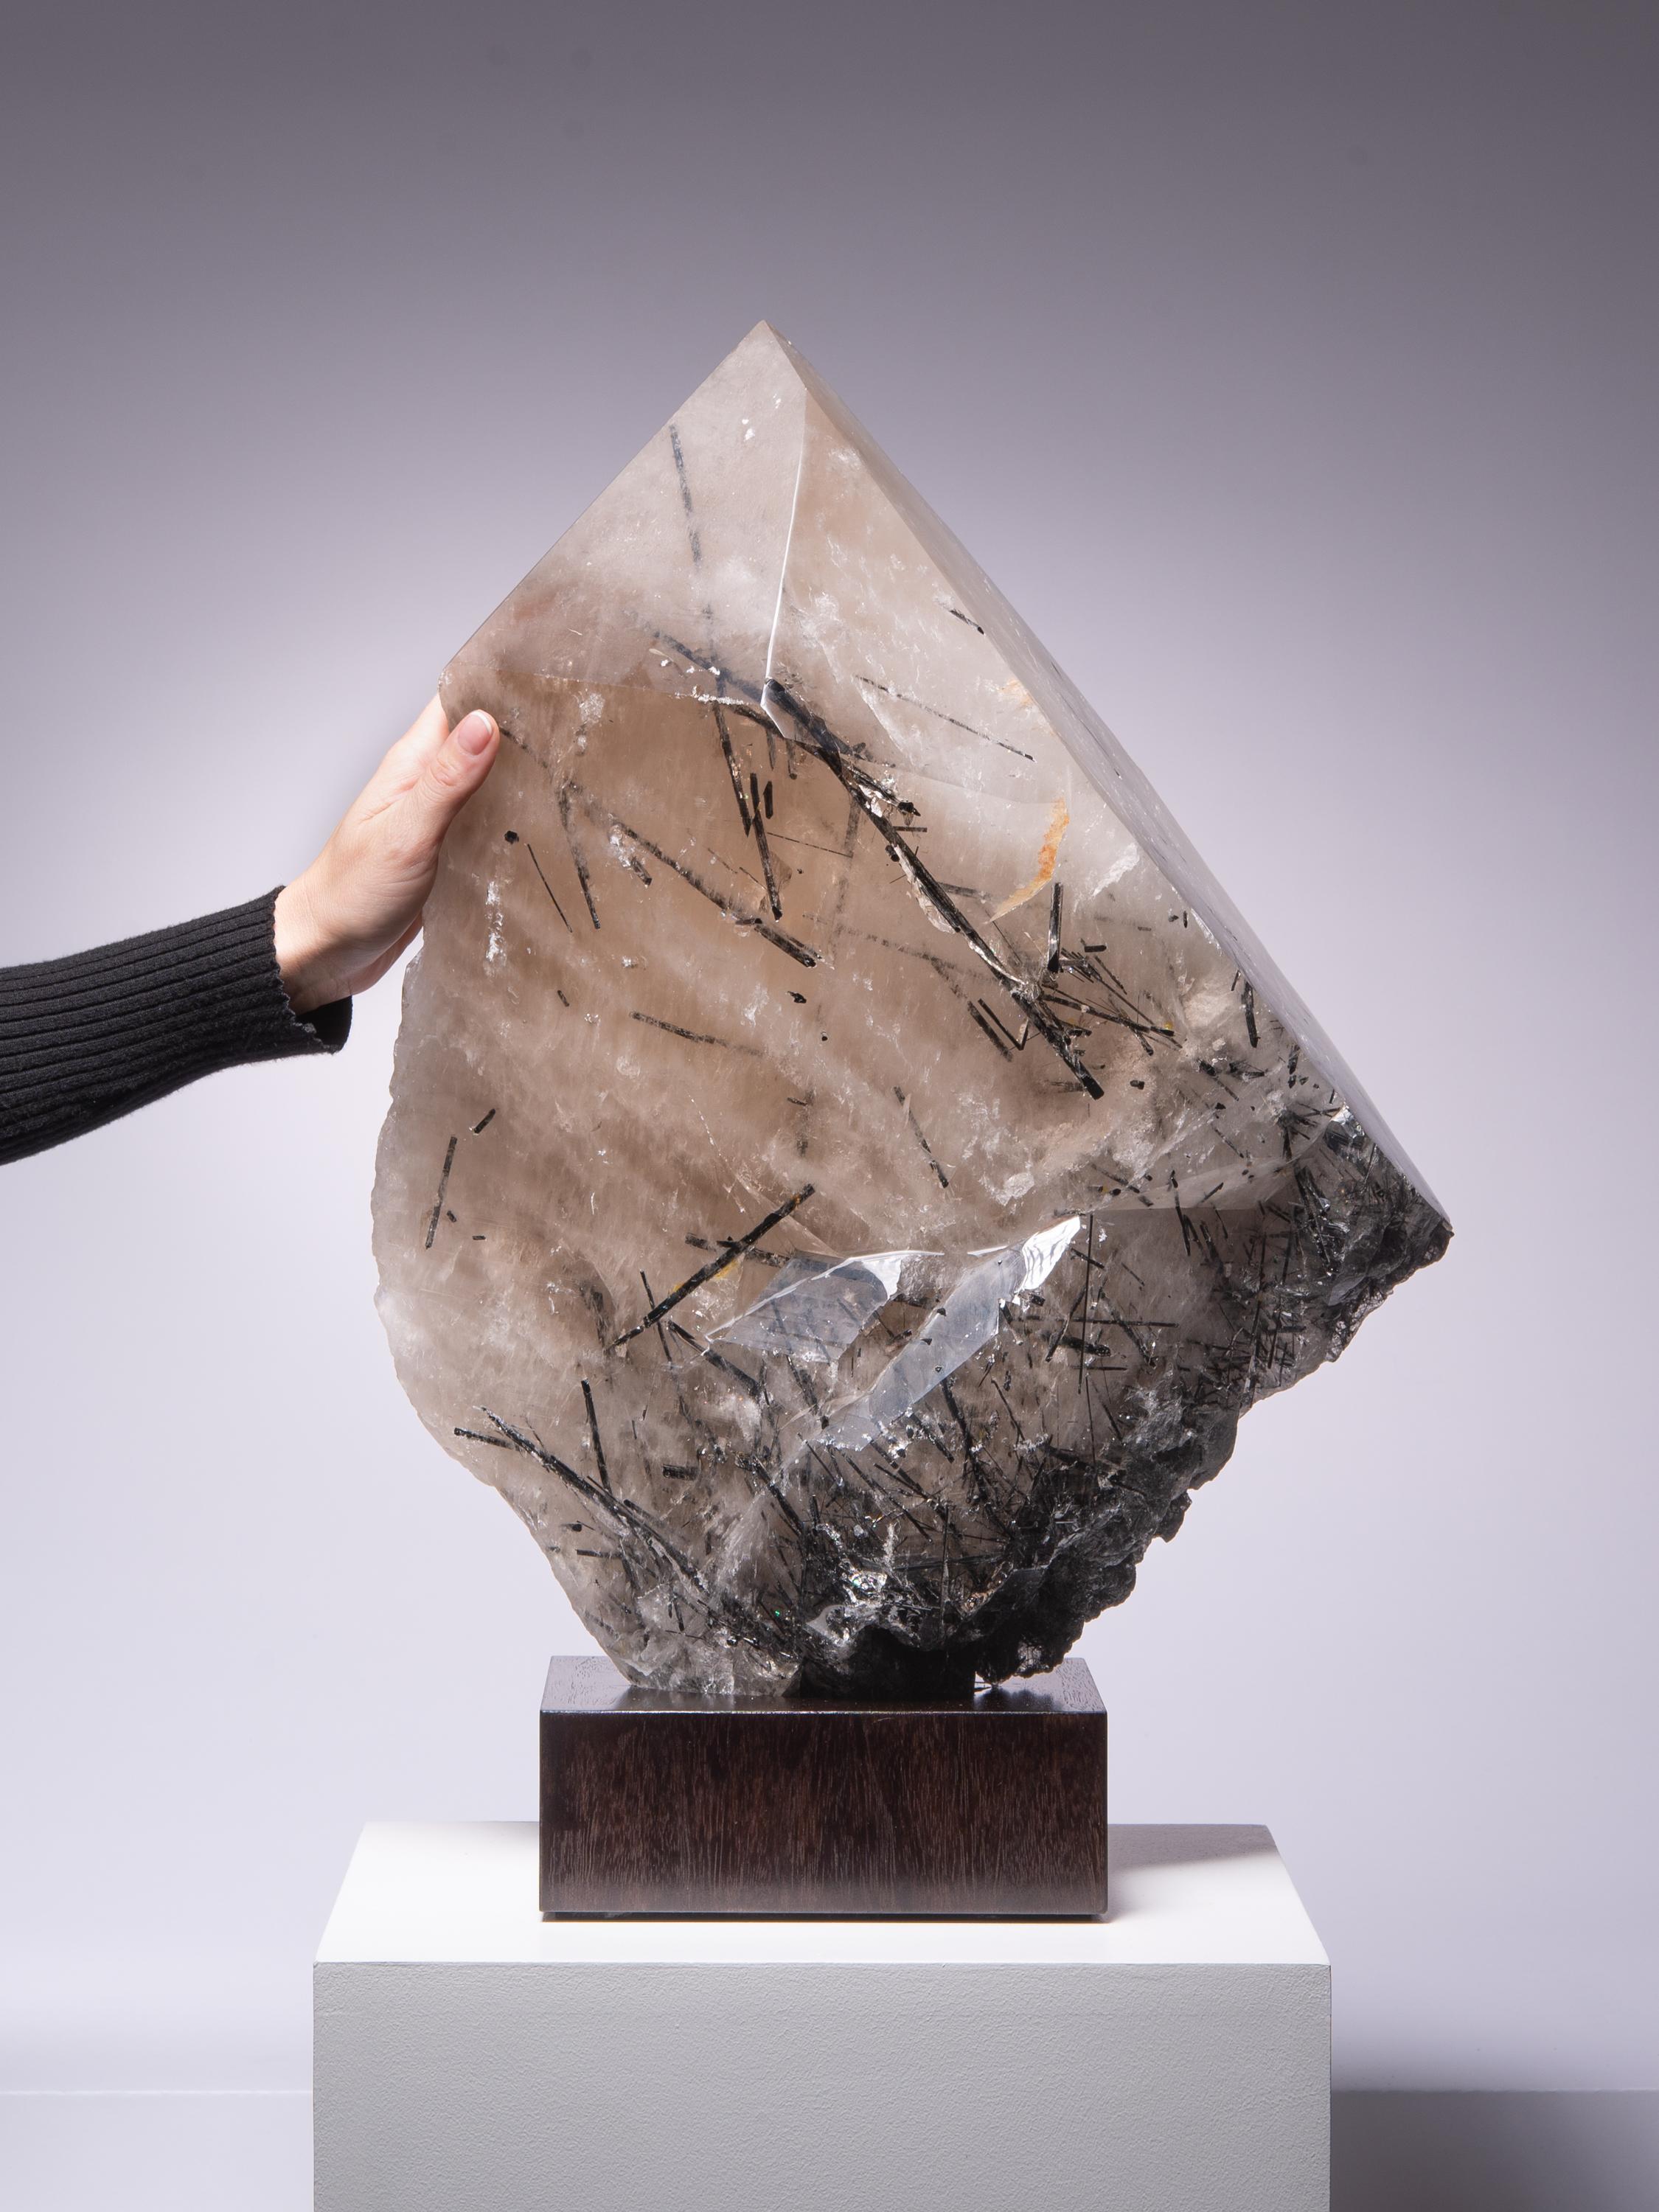 An impressive, large single crystal point of smoky quartz with pleasing facets. The interior of the quartz crystal is interspersed with gorgeous black tourmaline in a variety of orientations. A wonderful aesthetic and decorative piece.

This piece